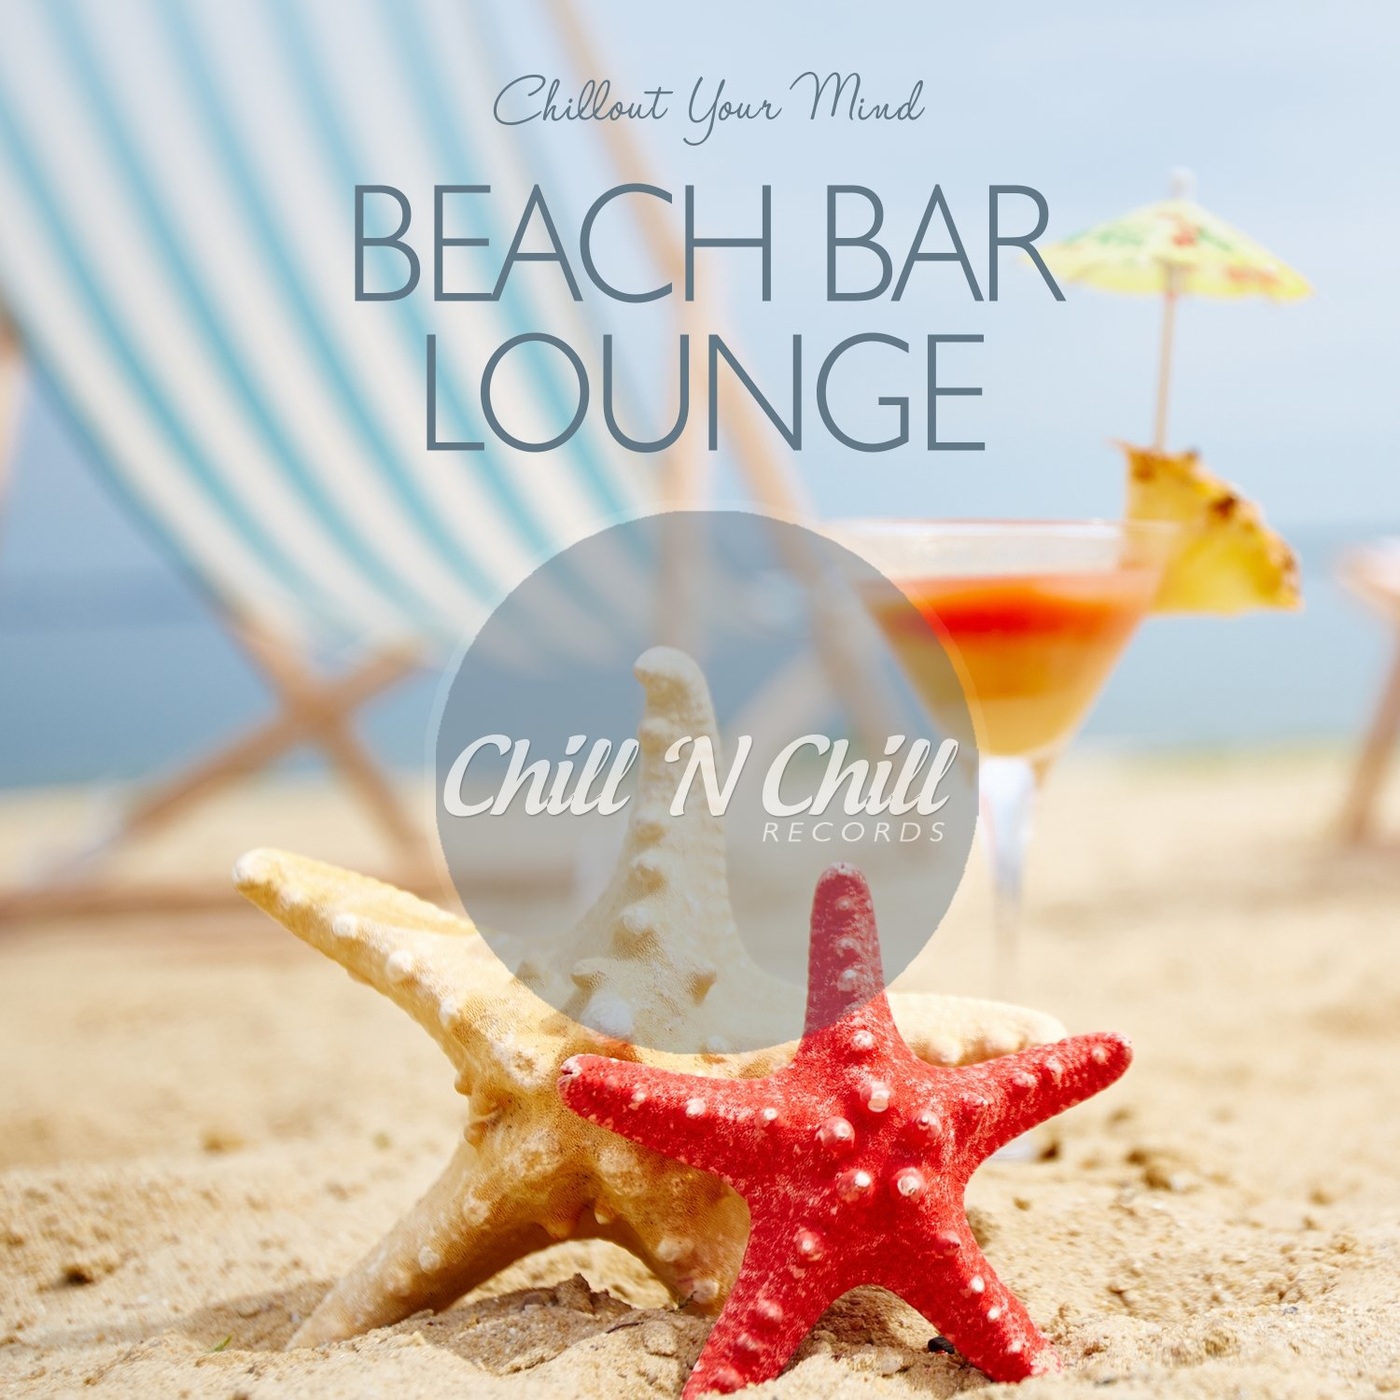 chill n chill records《beach bar lounge：chillout your mind 2020》